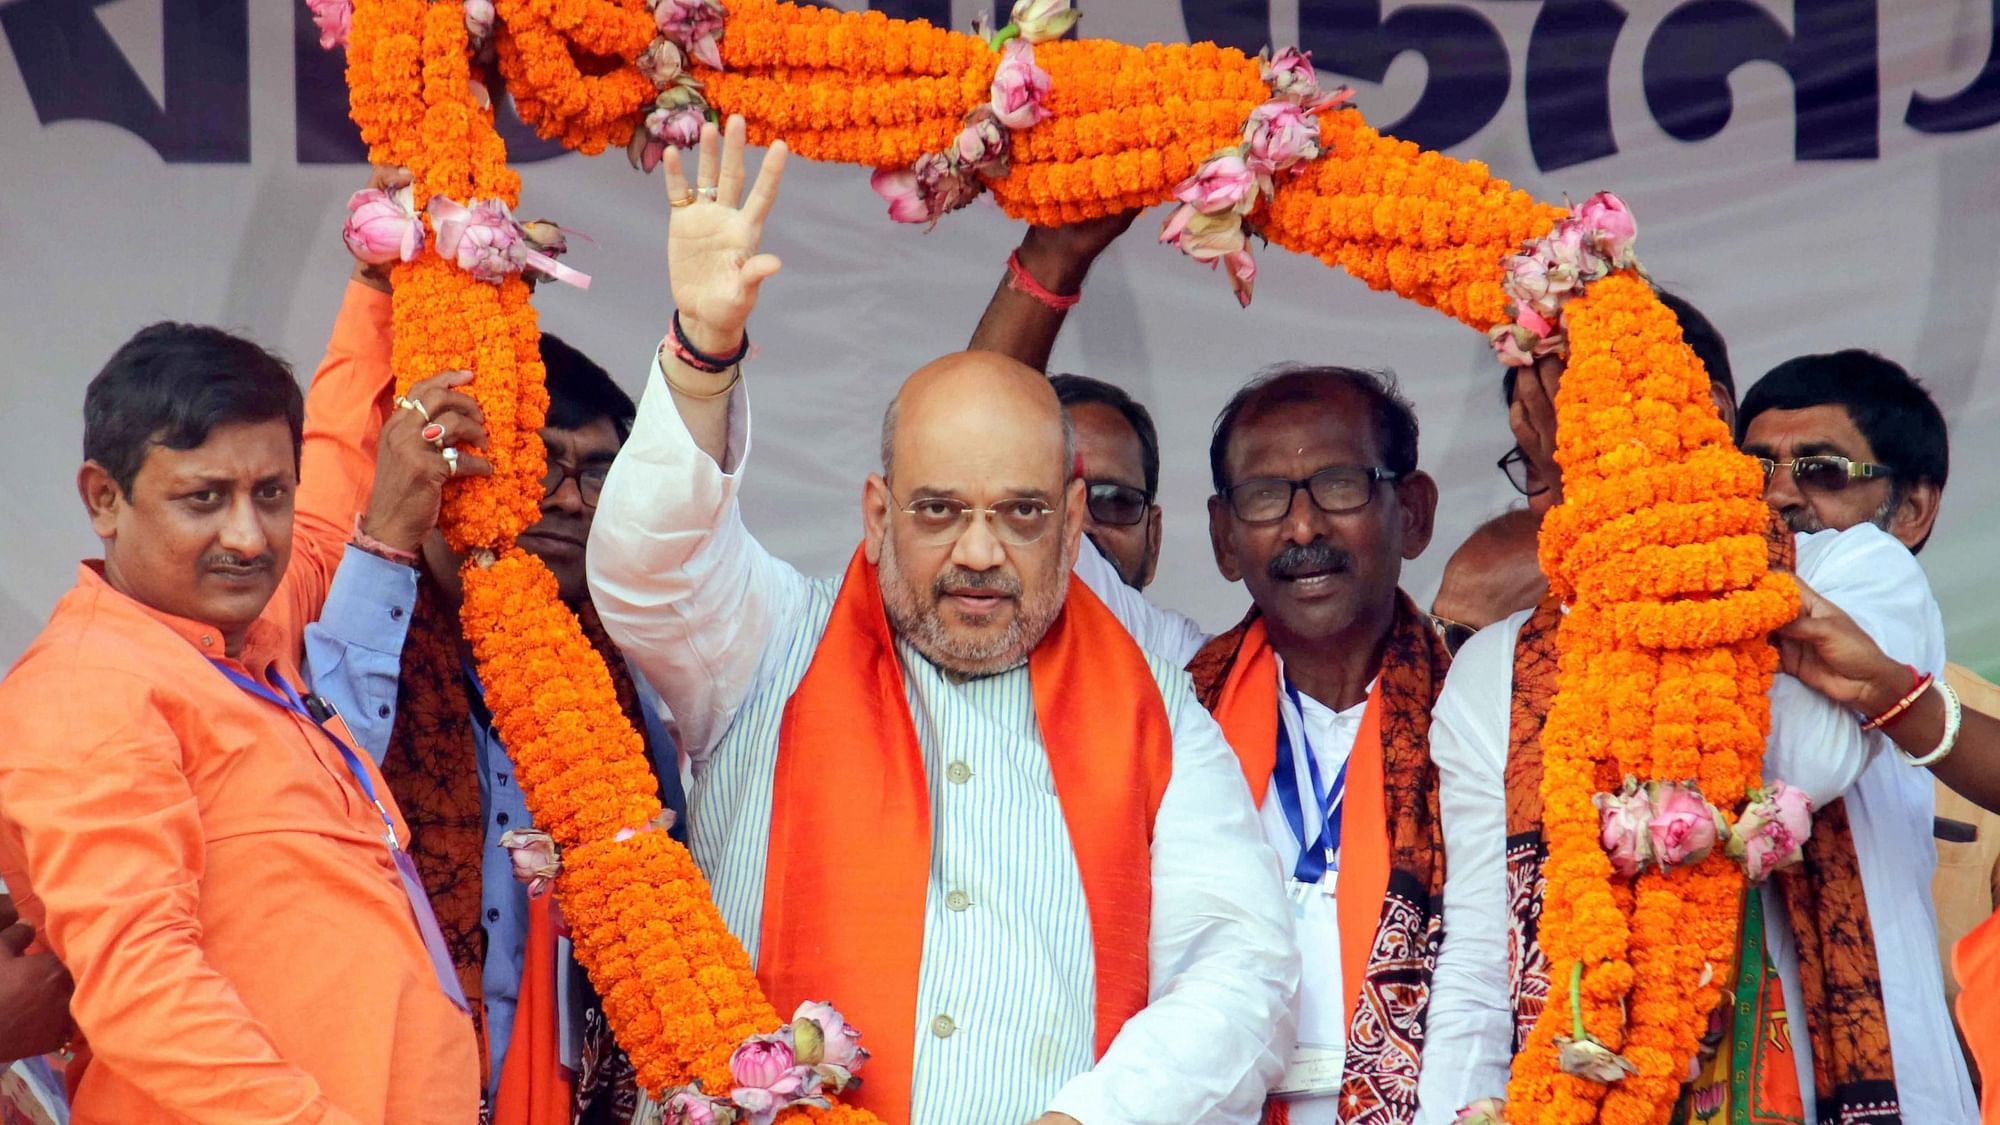 BJP President Amit Shah at an election rally on Monday.